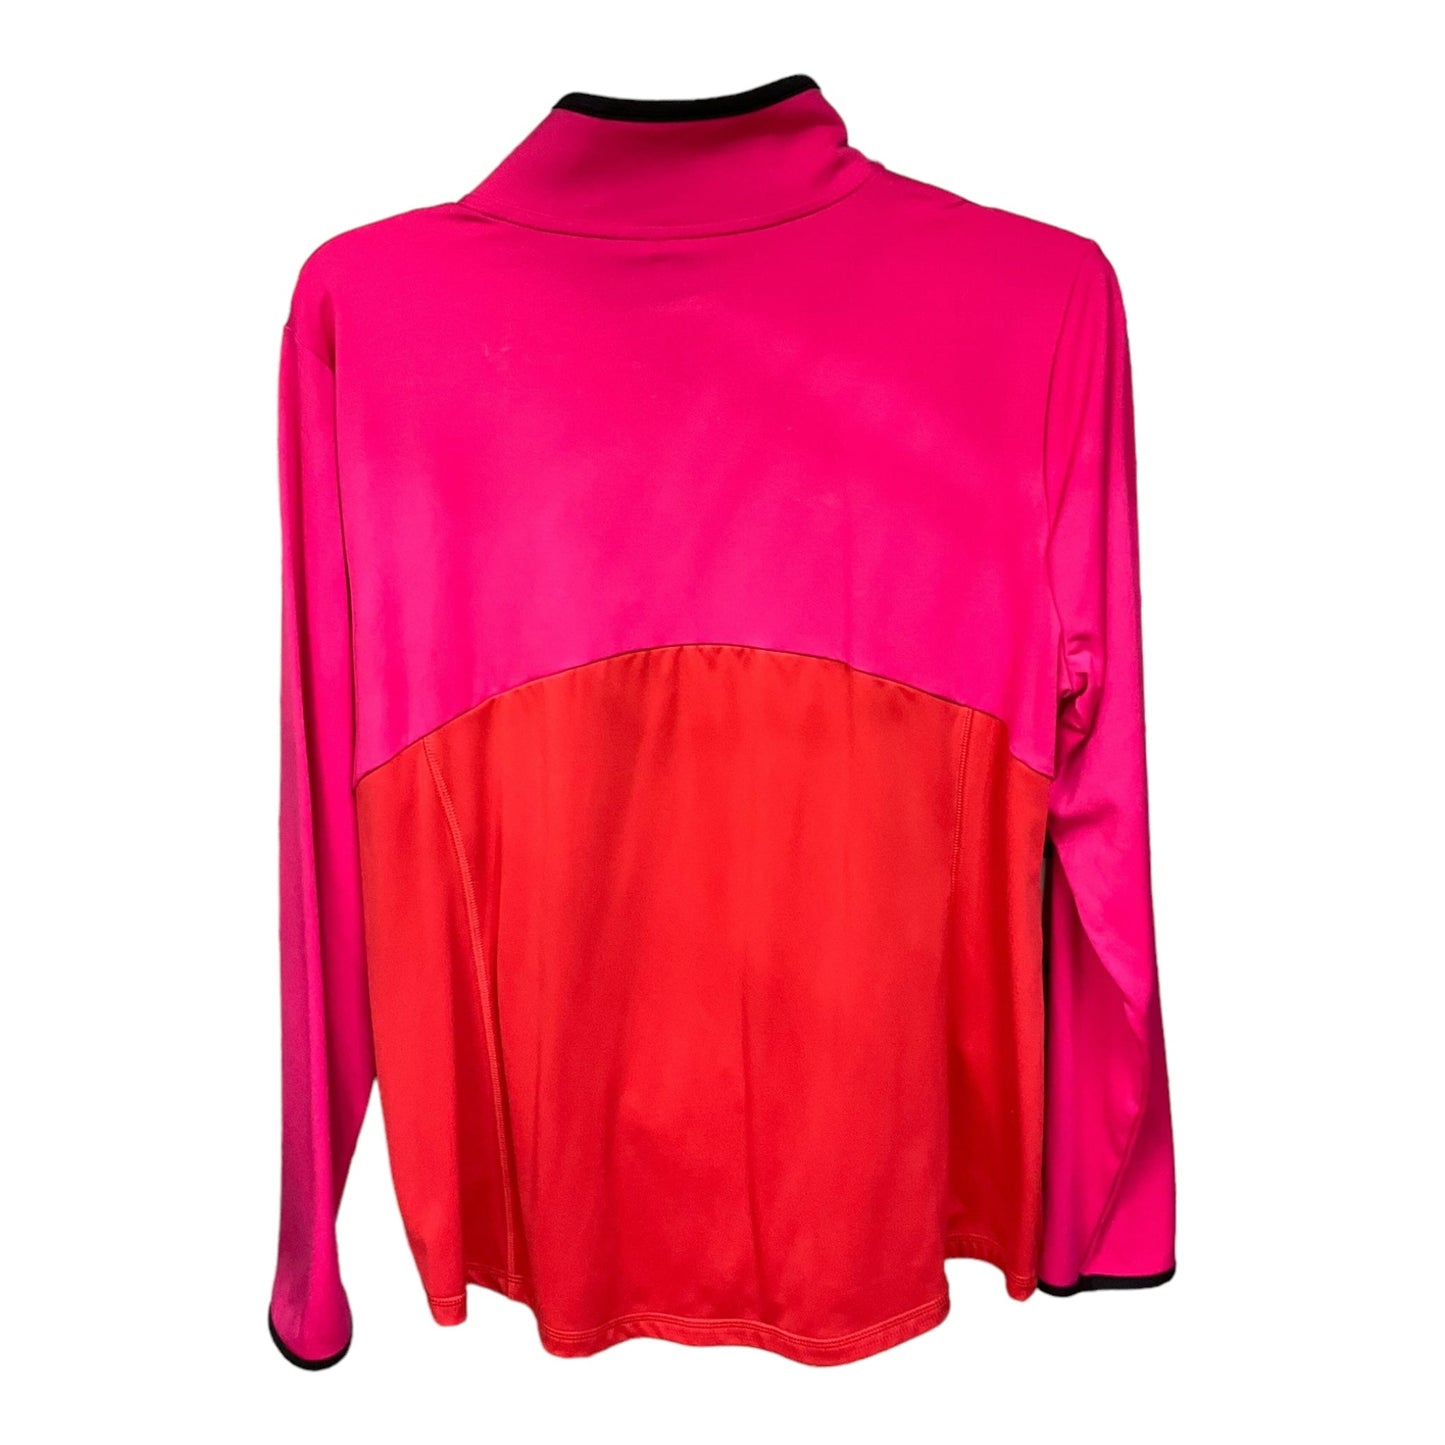 Pink Athletic Top Long Sleeve Collar Talbots, Size S